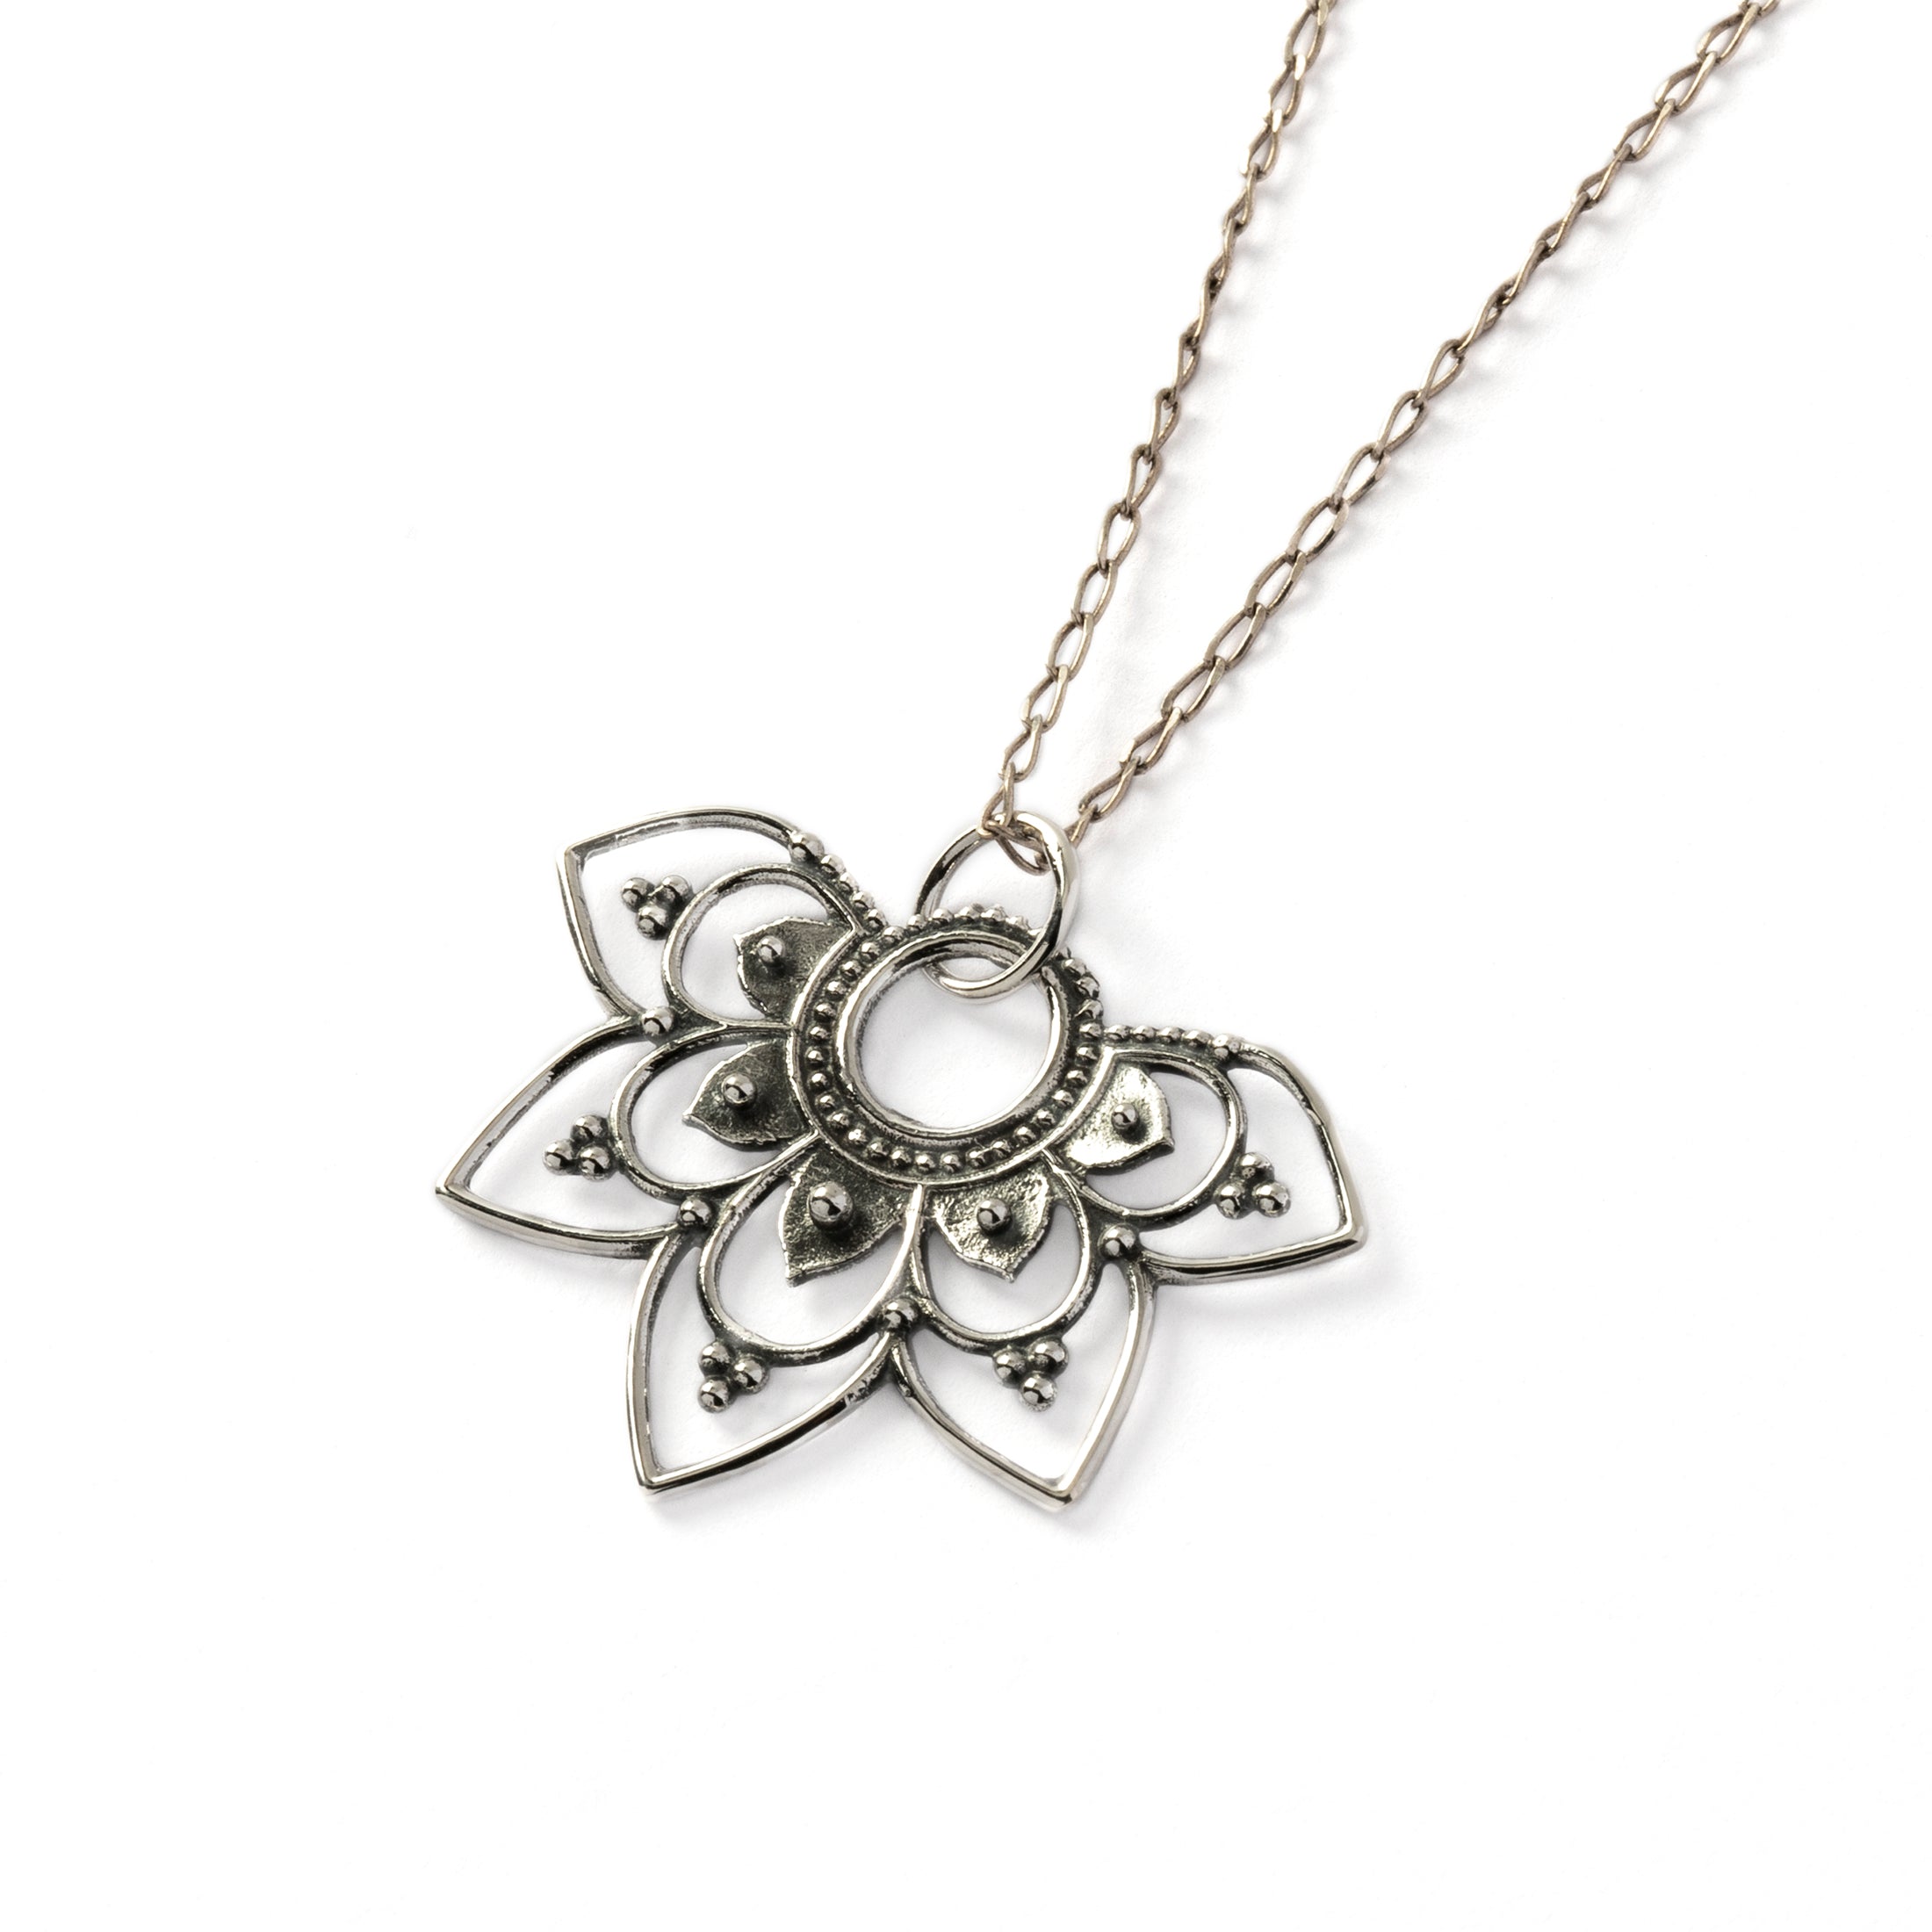 Vinyasa flower silver necklace right side view